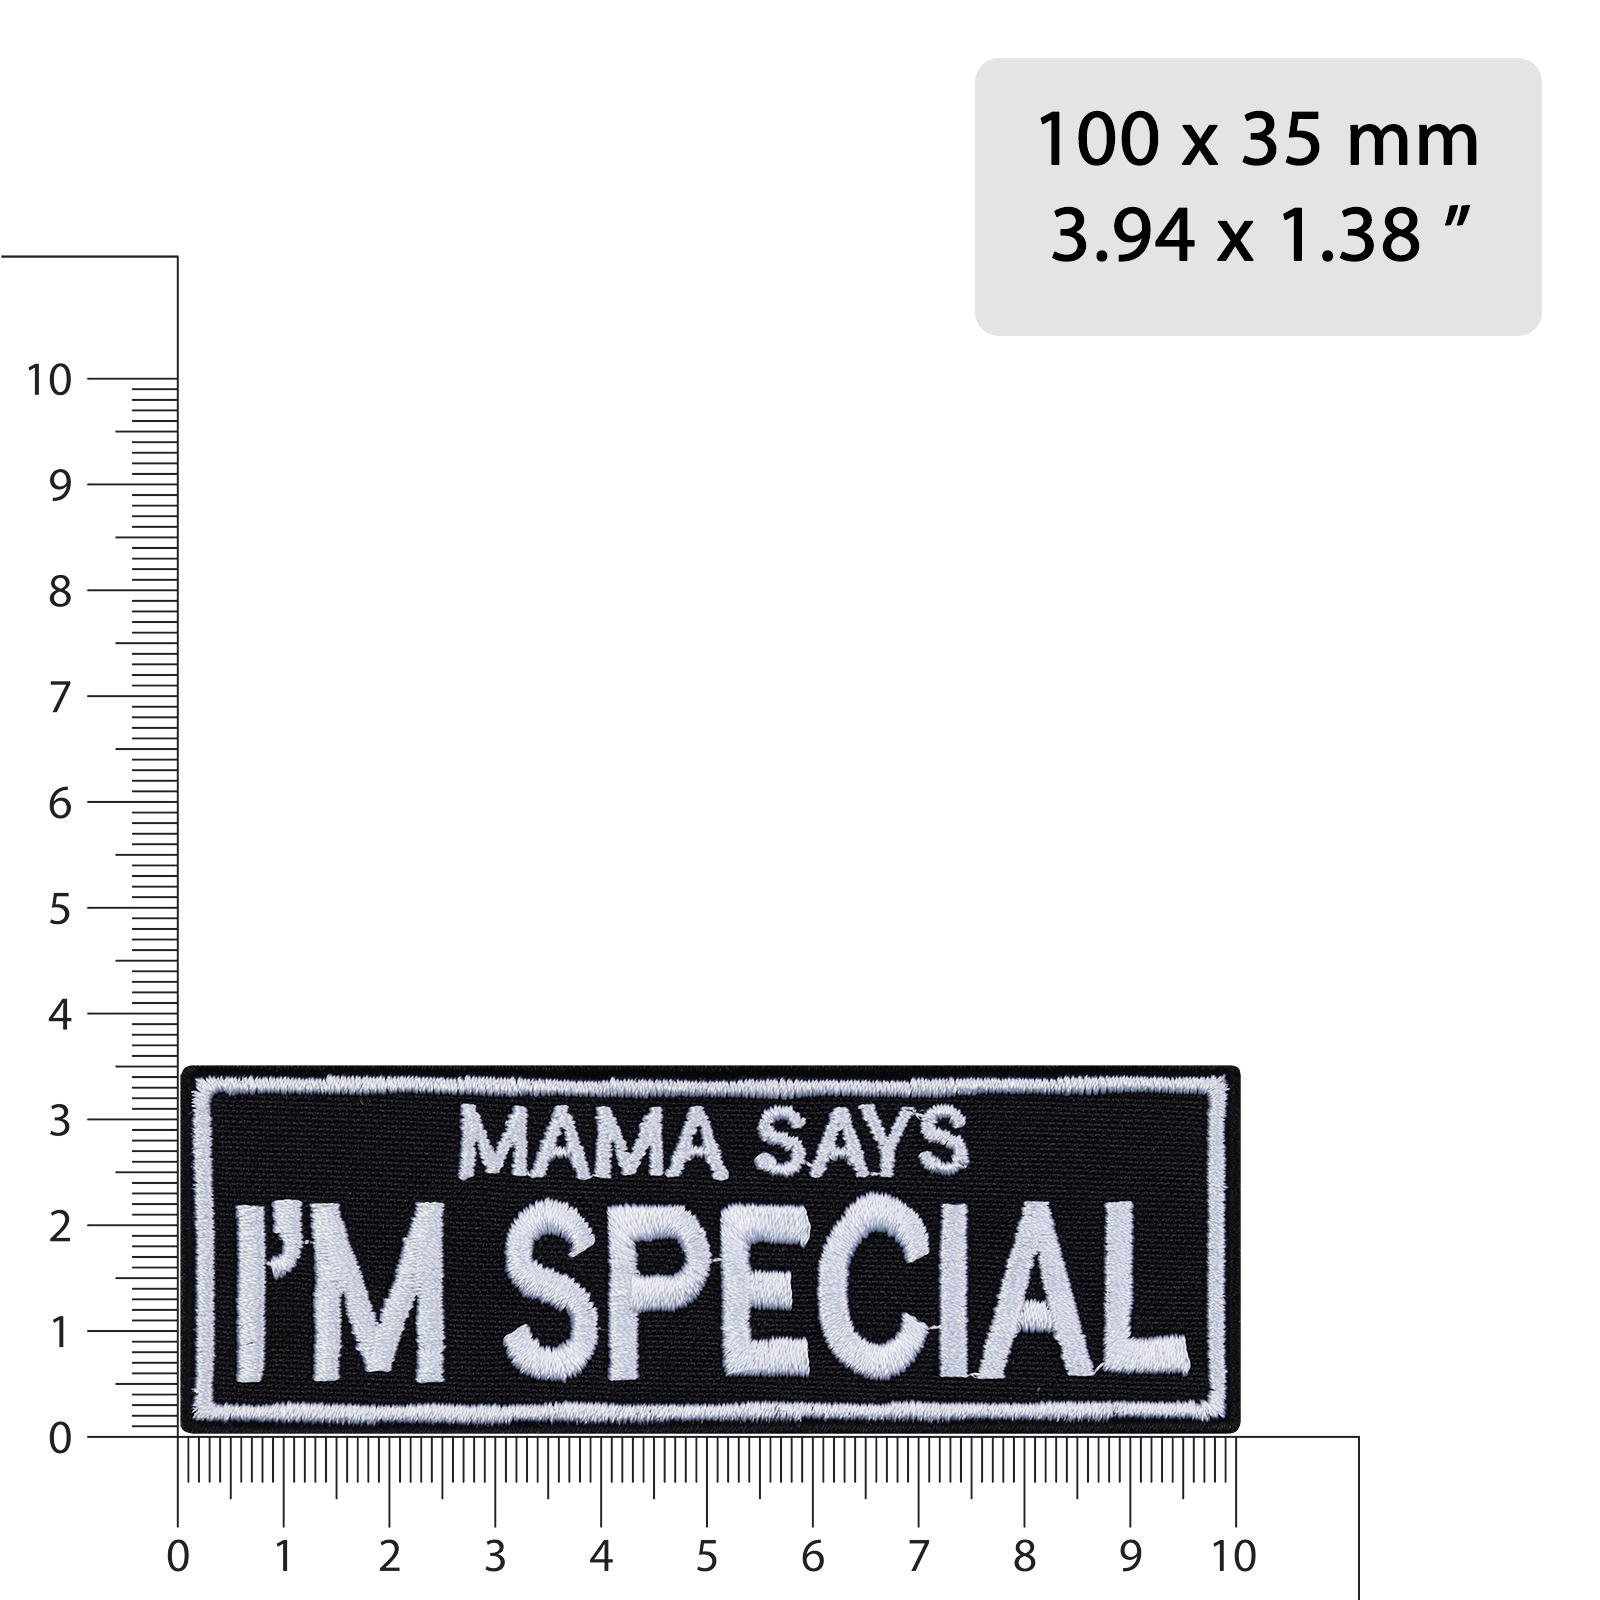 Mama says: I'm special - Patch